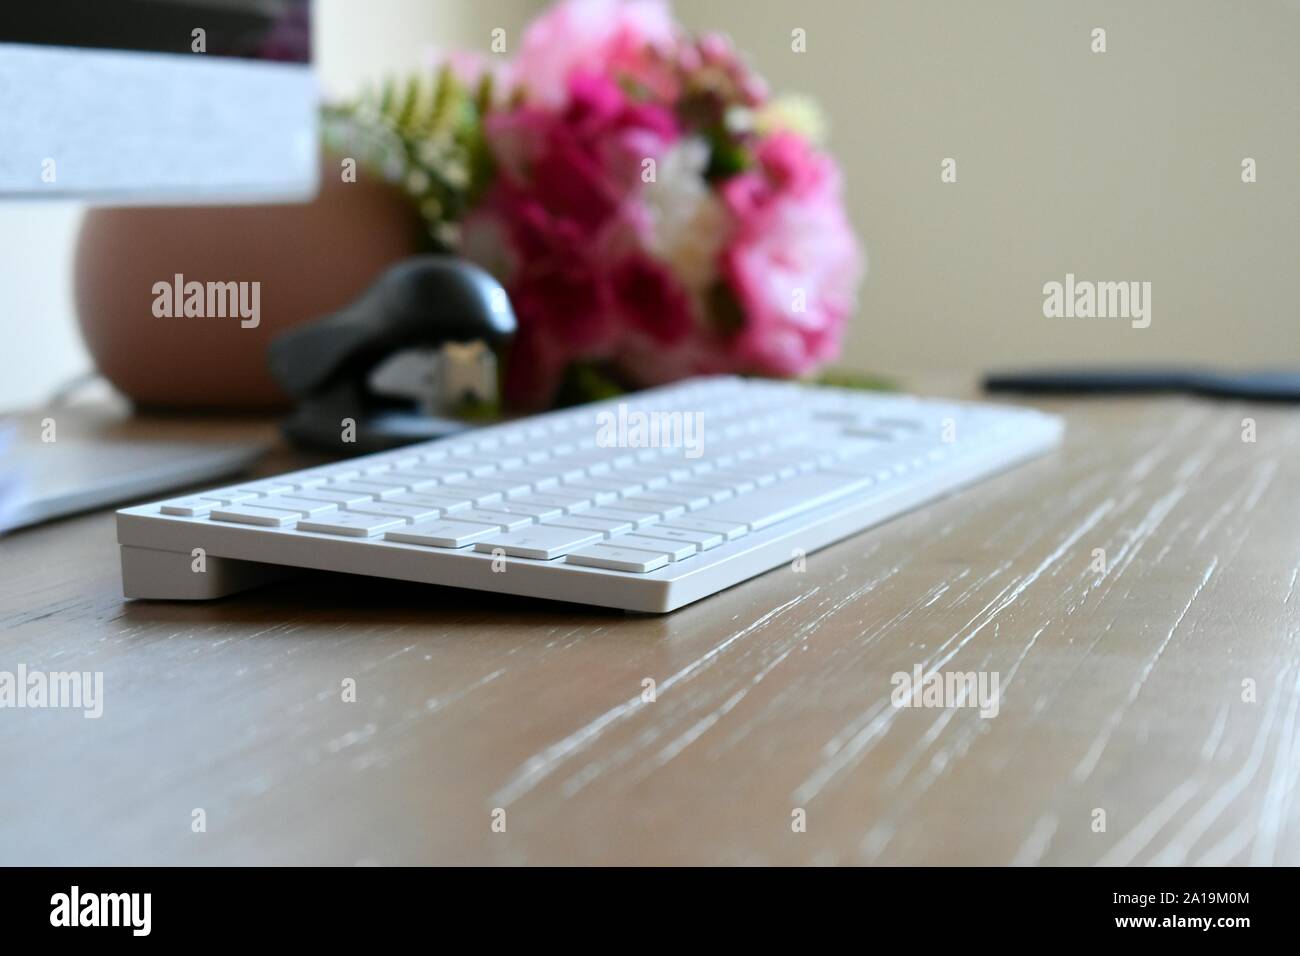 computer pc keyboard on a desk Stock Photo